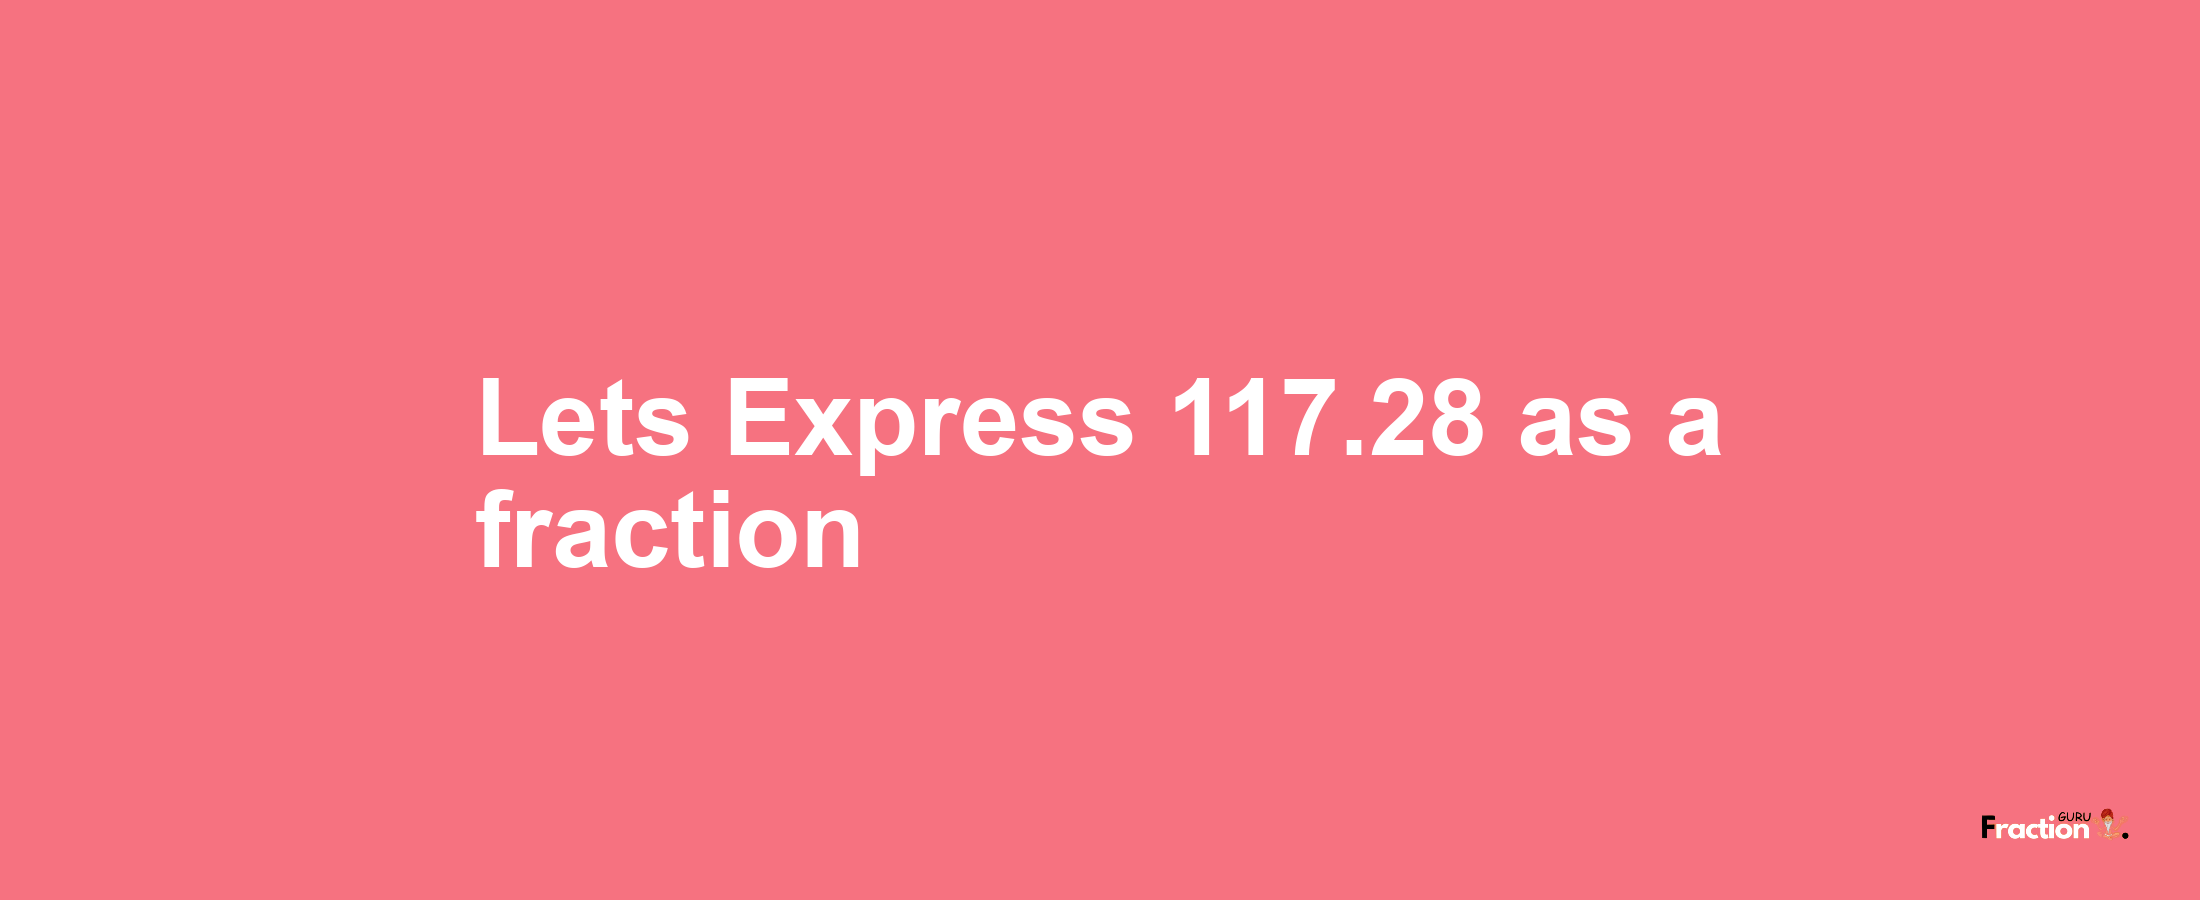 Lets Express 117.28 as afraction